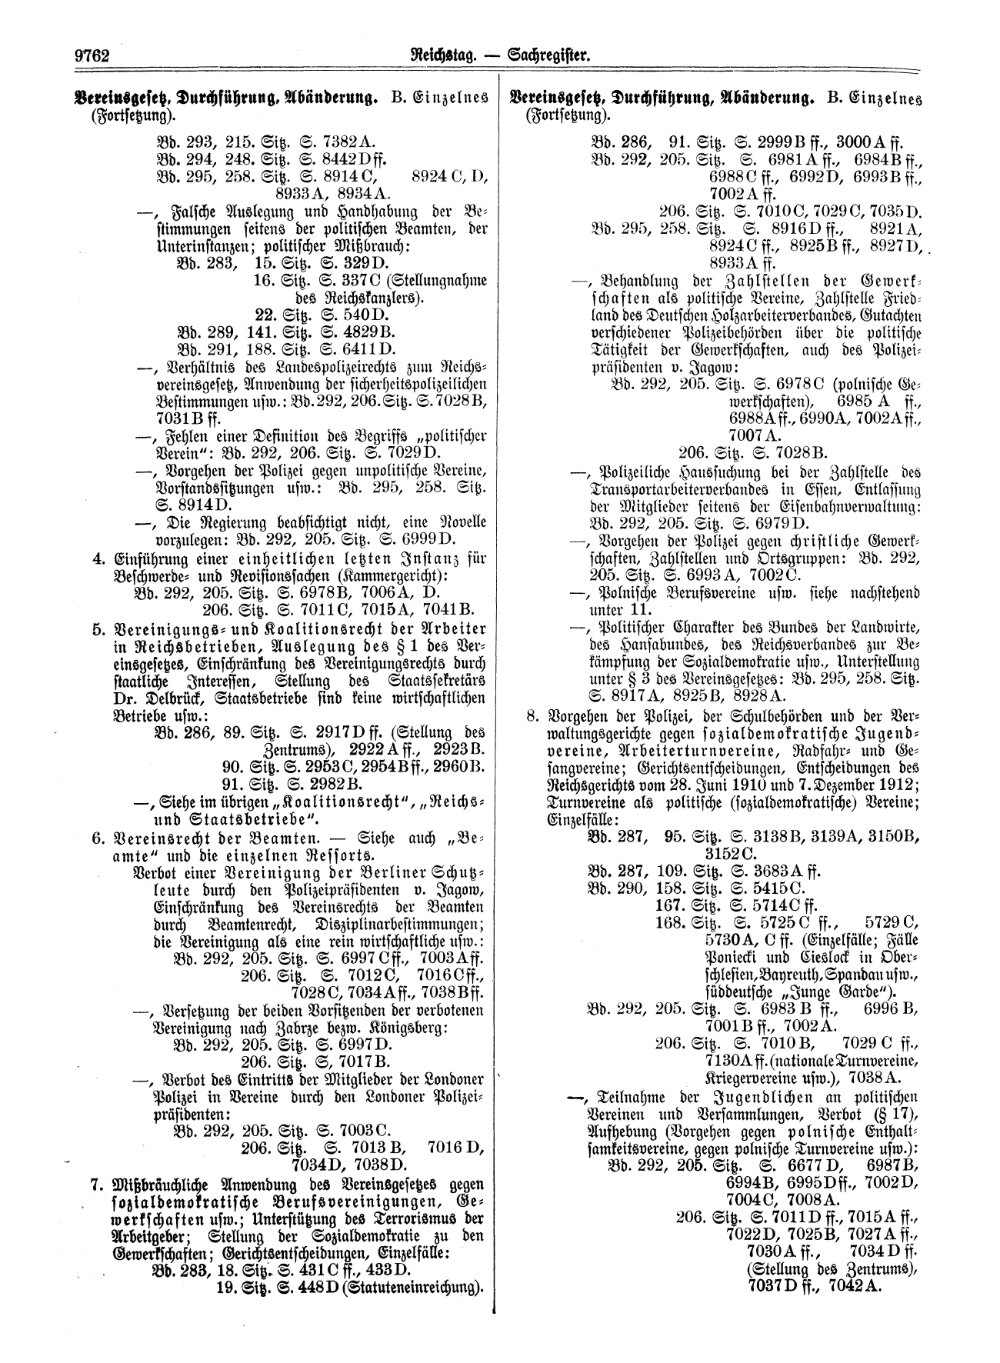 Scan of page 9762